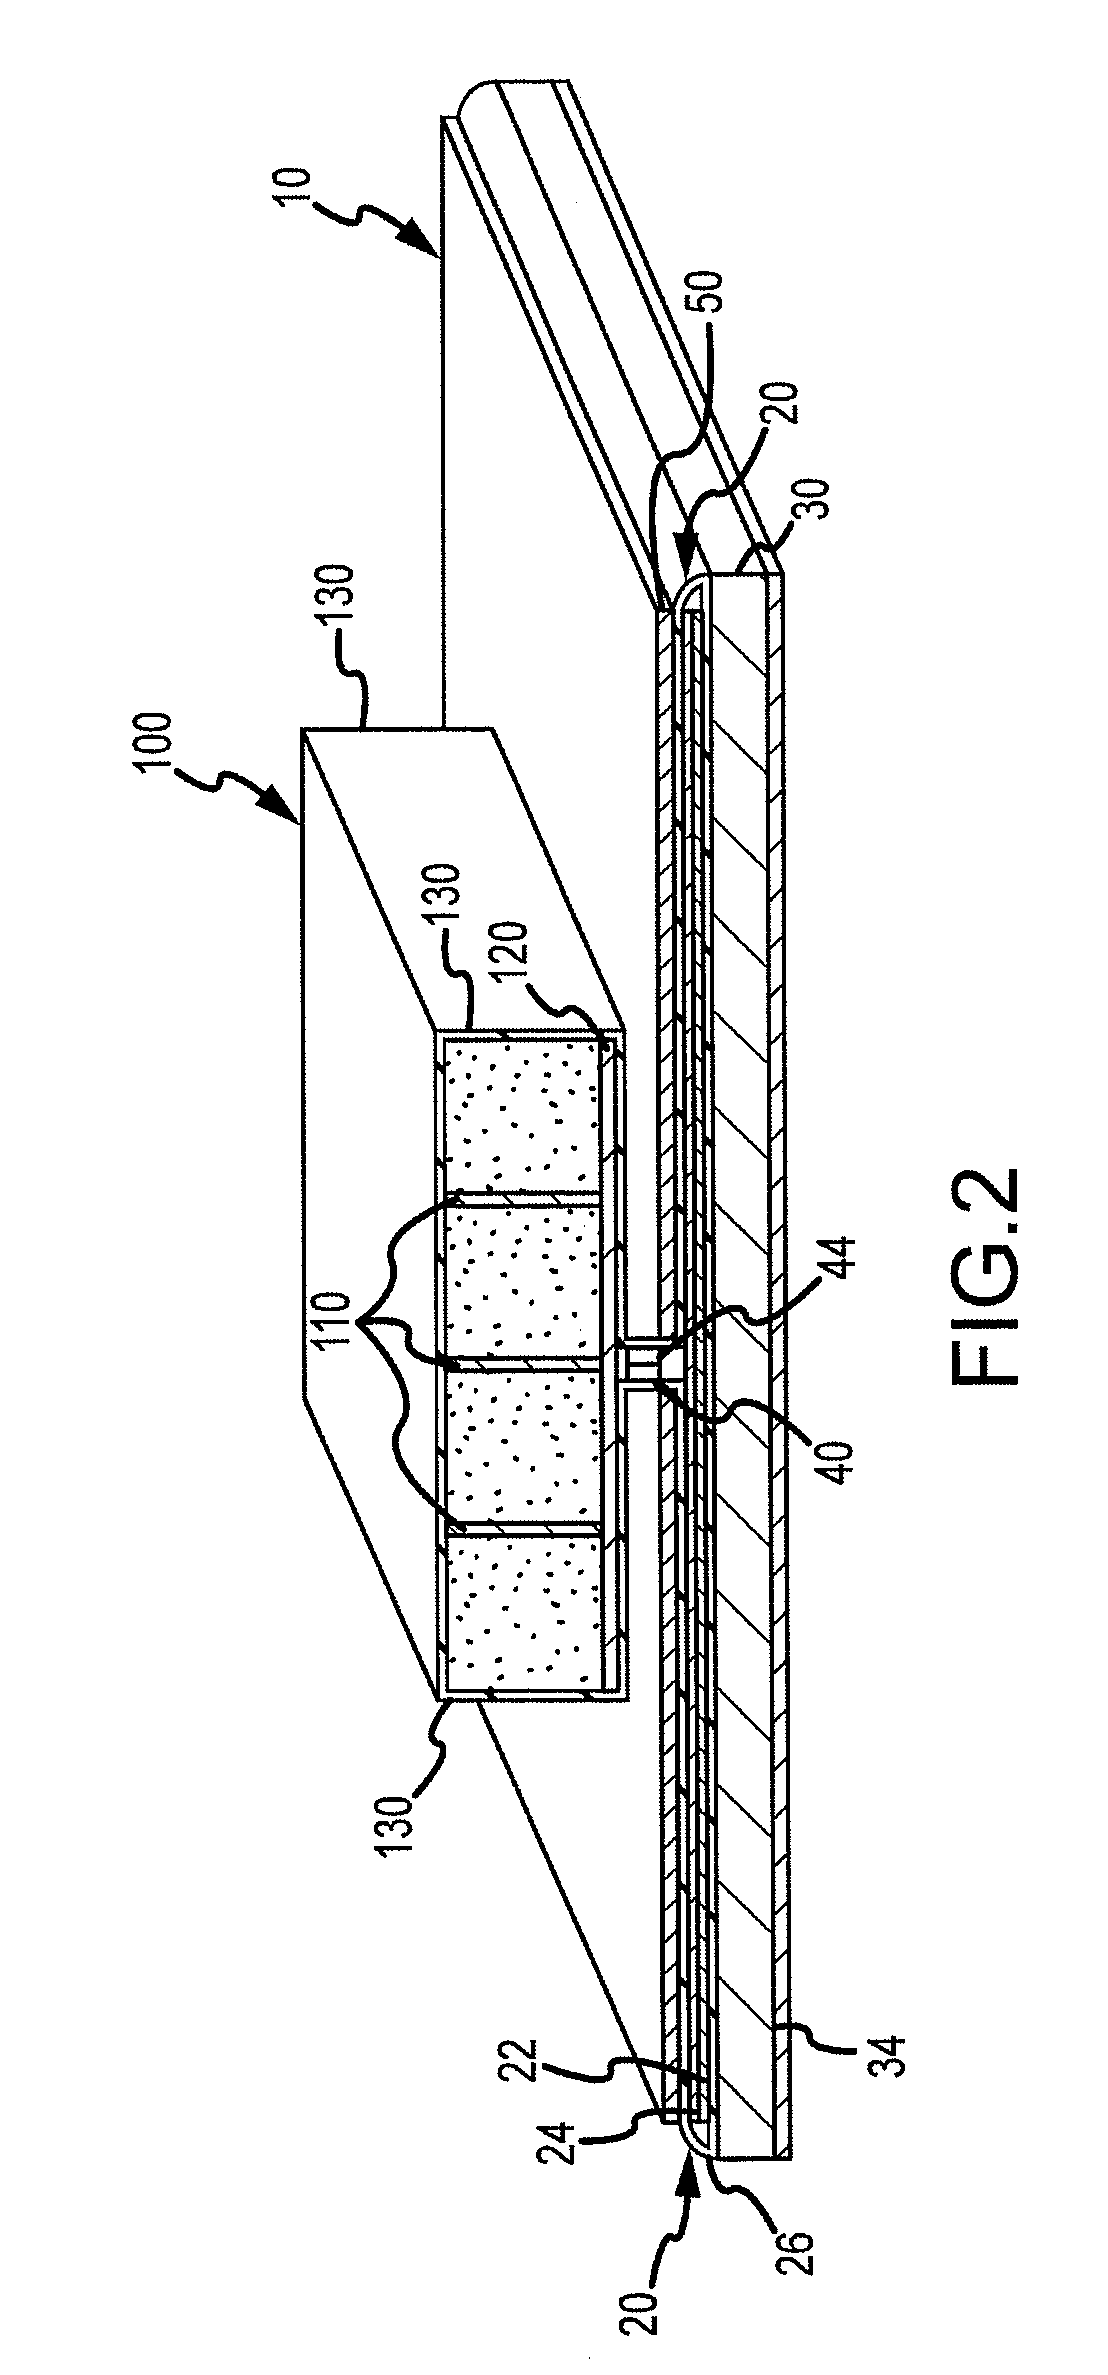 Sorption-based adhesive contact cooling apparatus and method